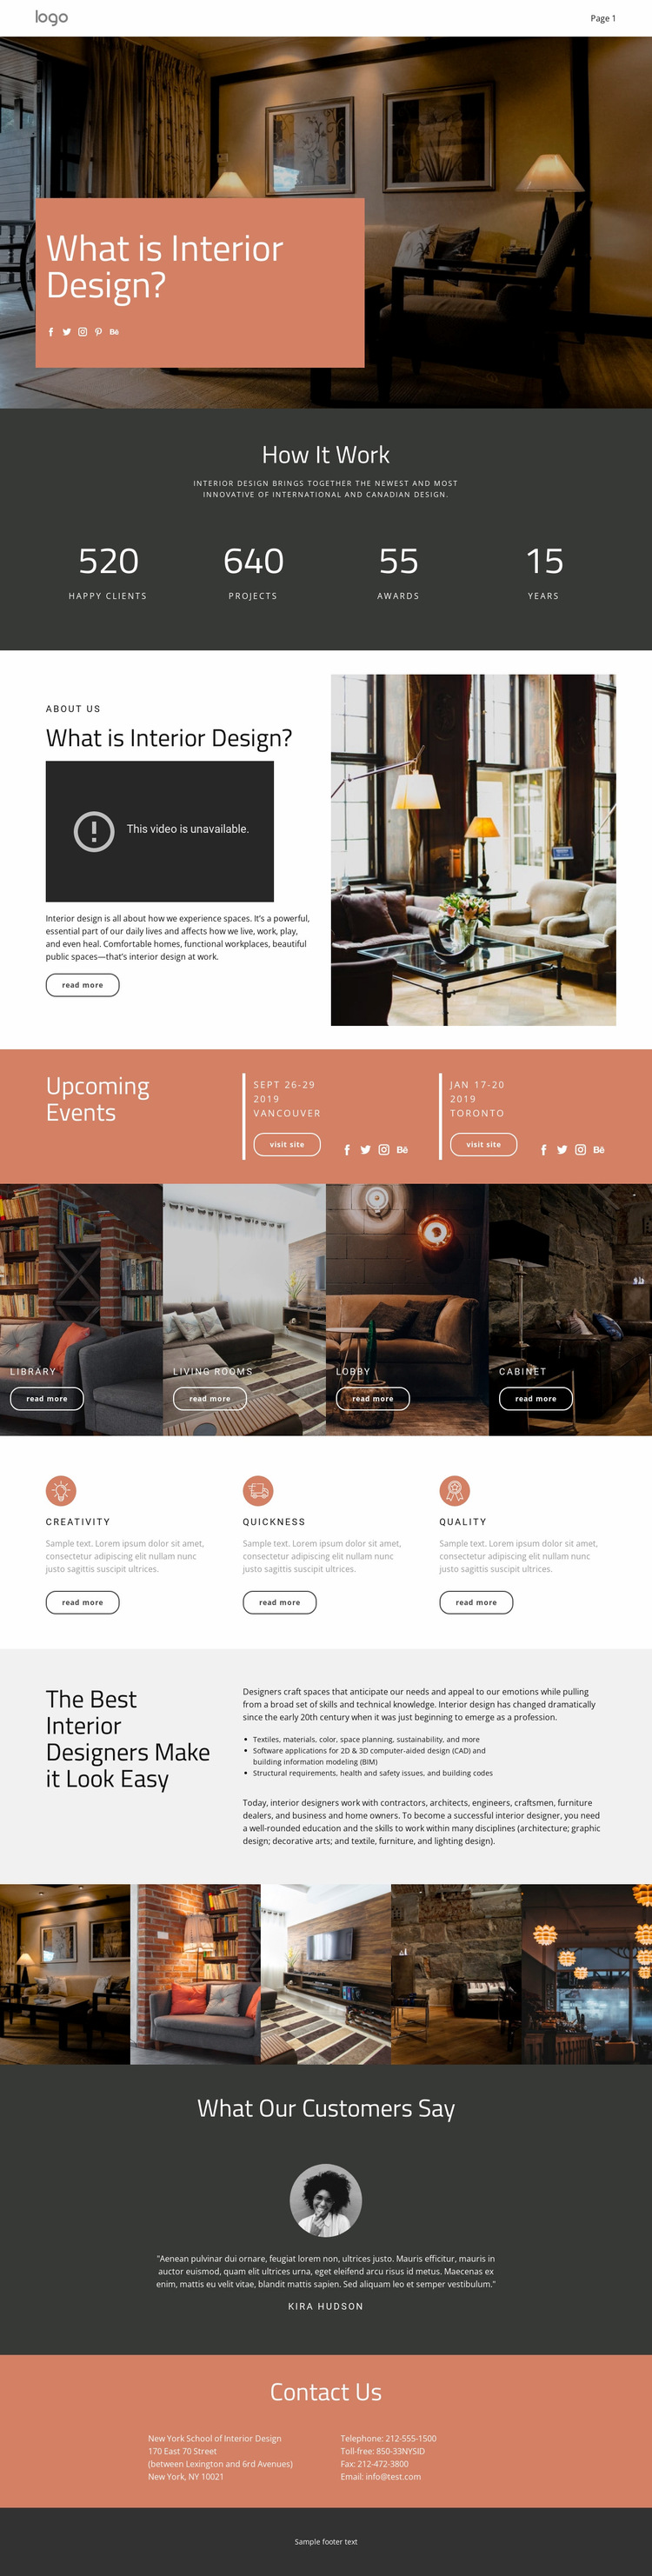 Design of houses and apartments Website Builder Templates